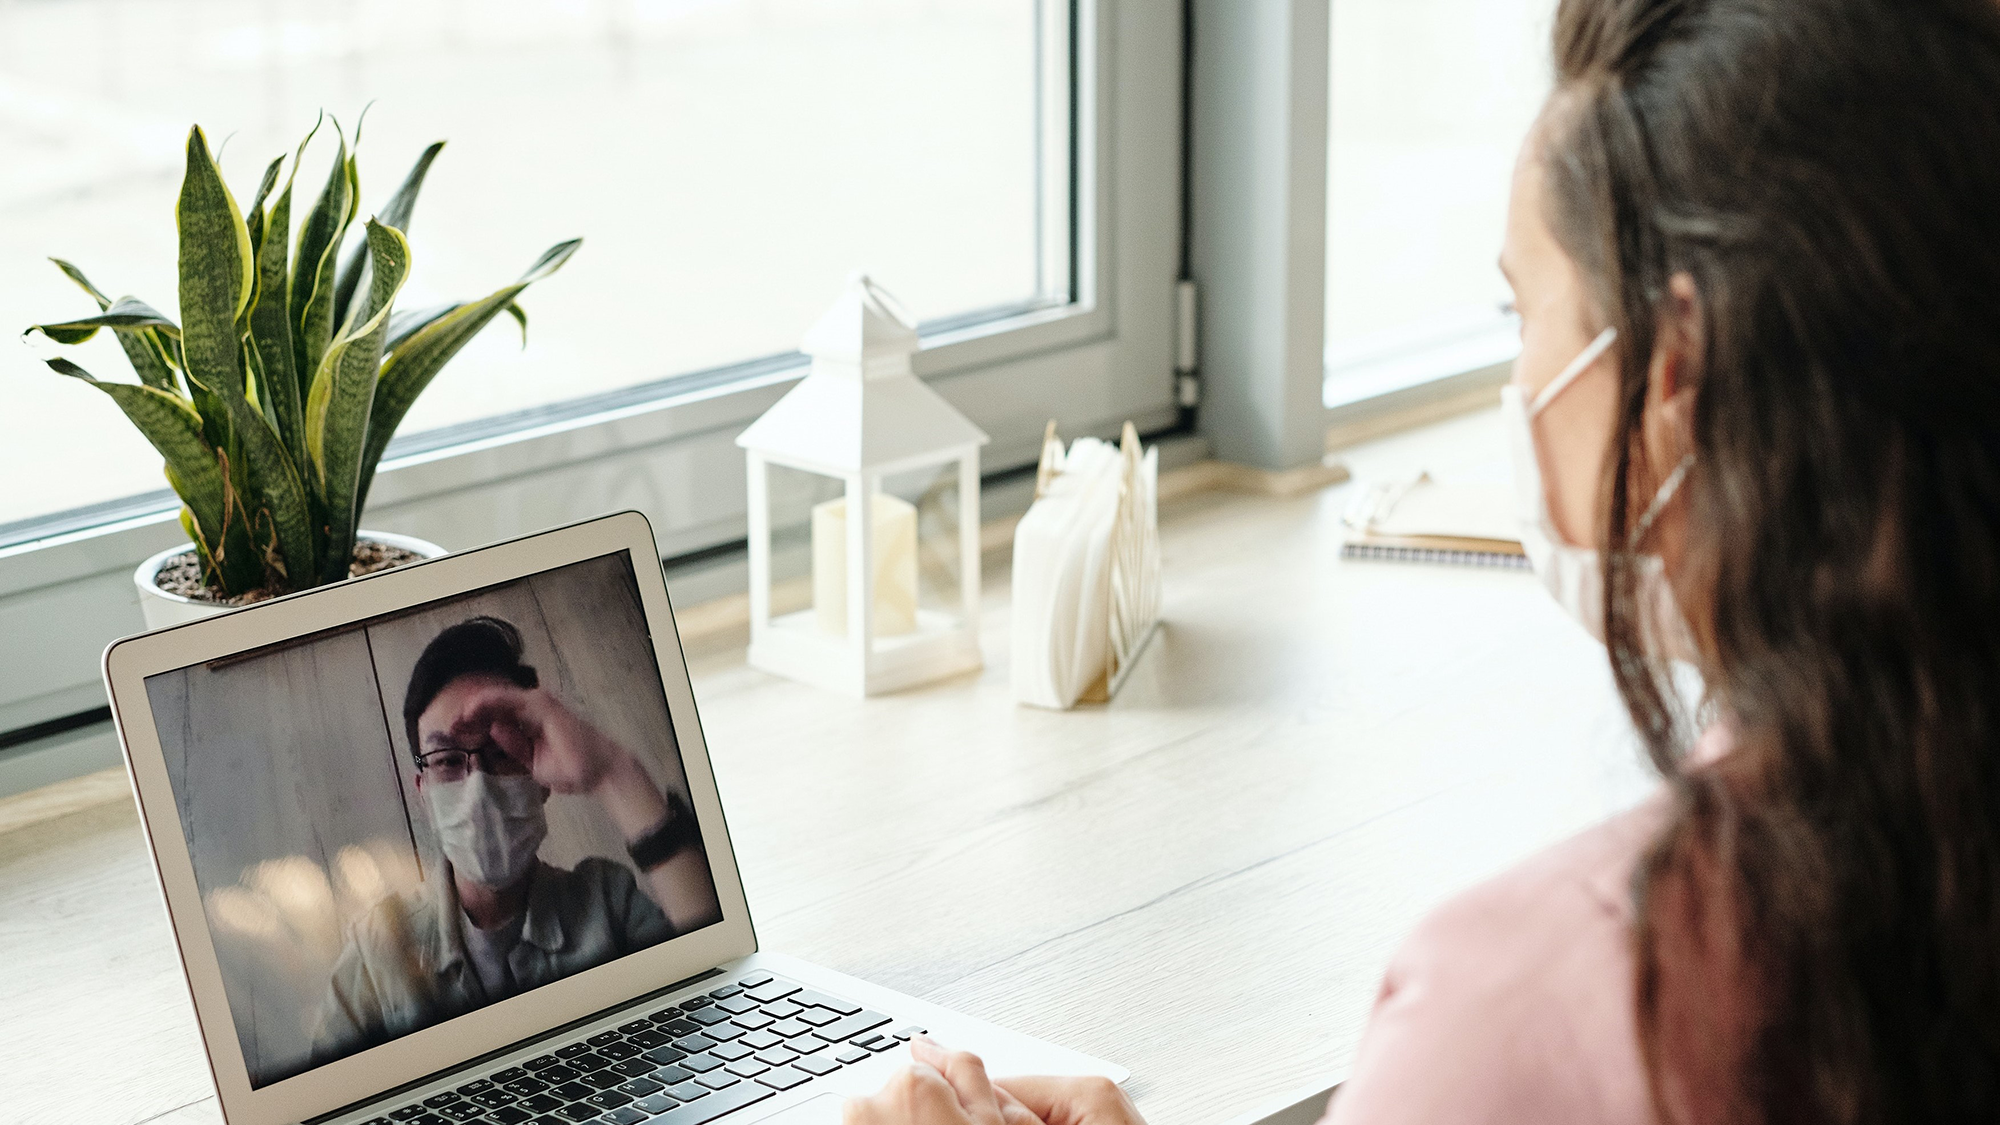 Woman on her laptop, wearing a mask, and video chatting with a man also wearing a mask